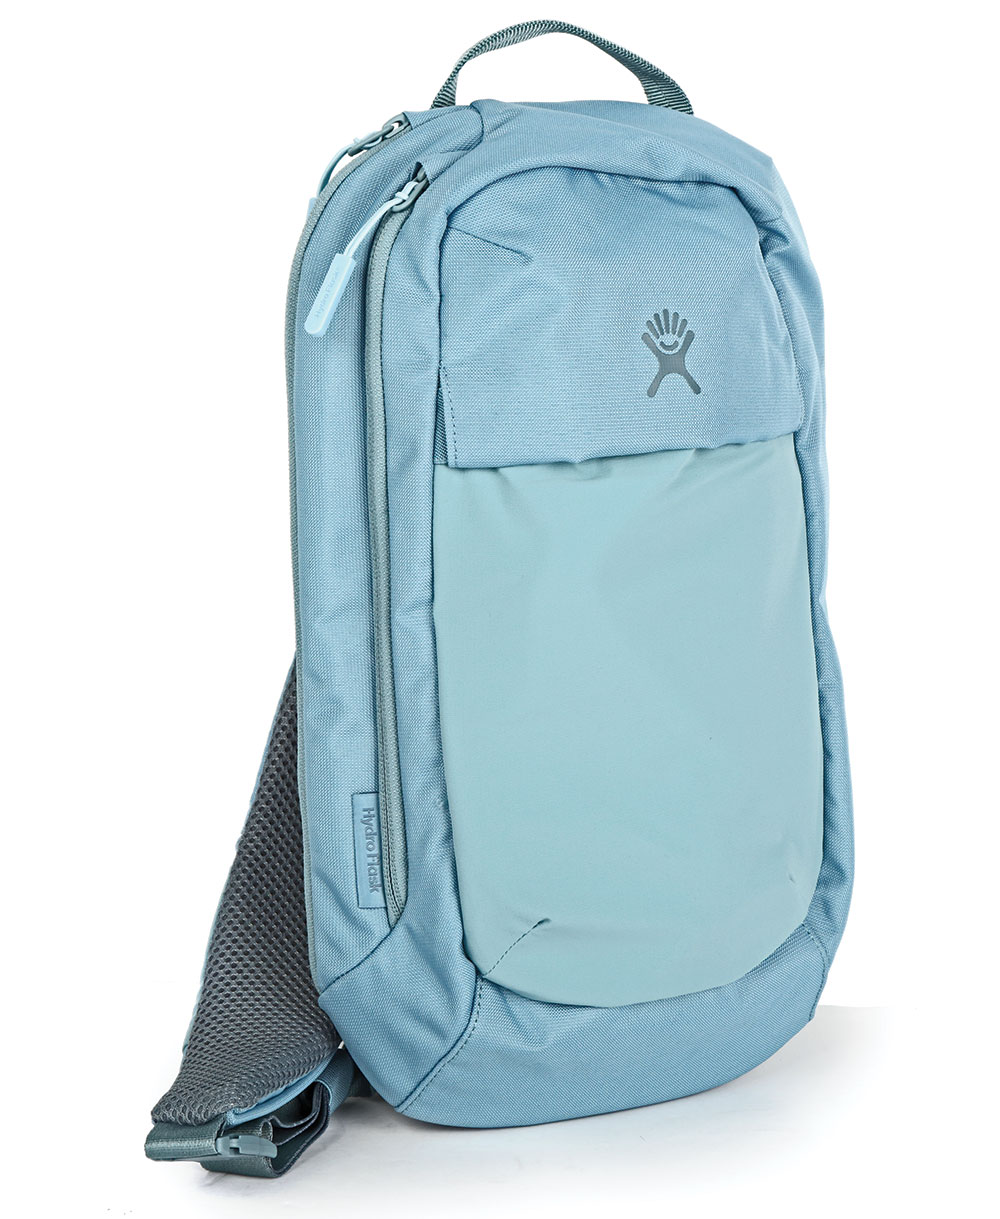 A light blue backpack with one strap and the Hydroflask logo.